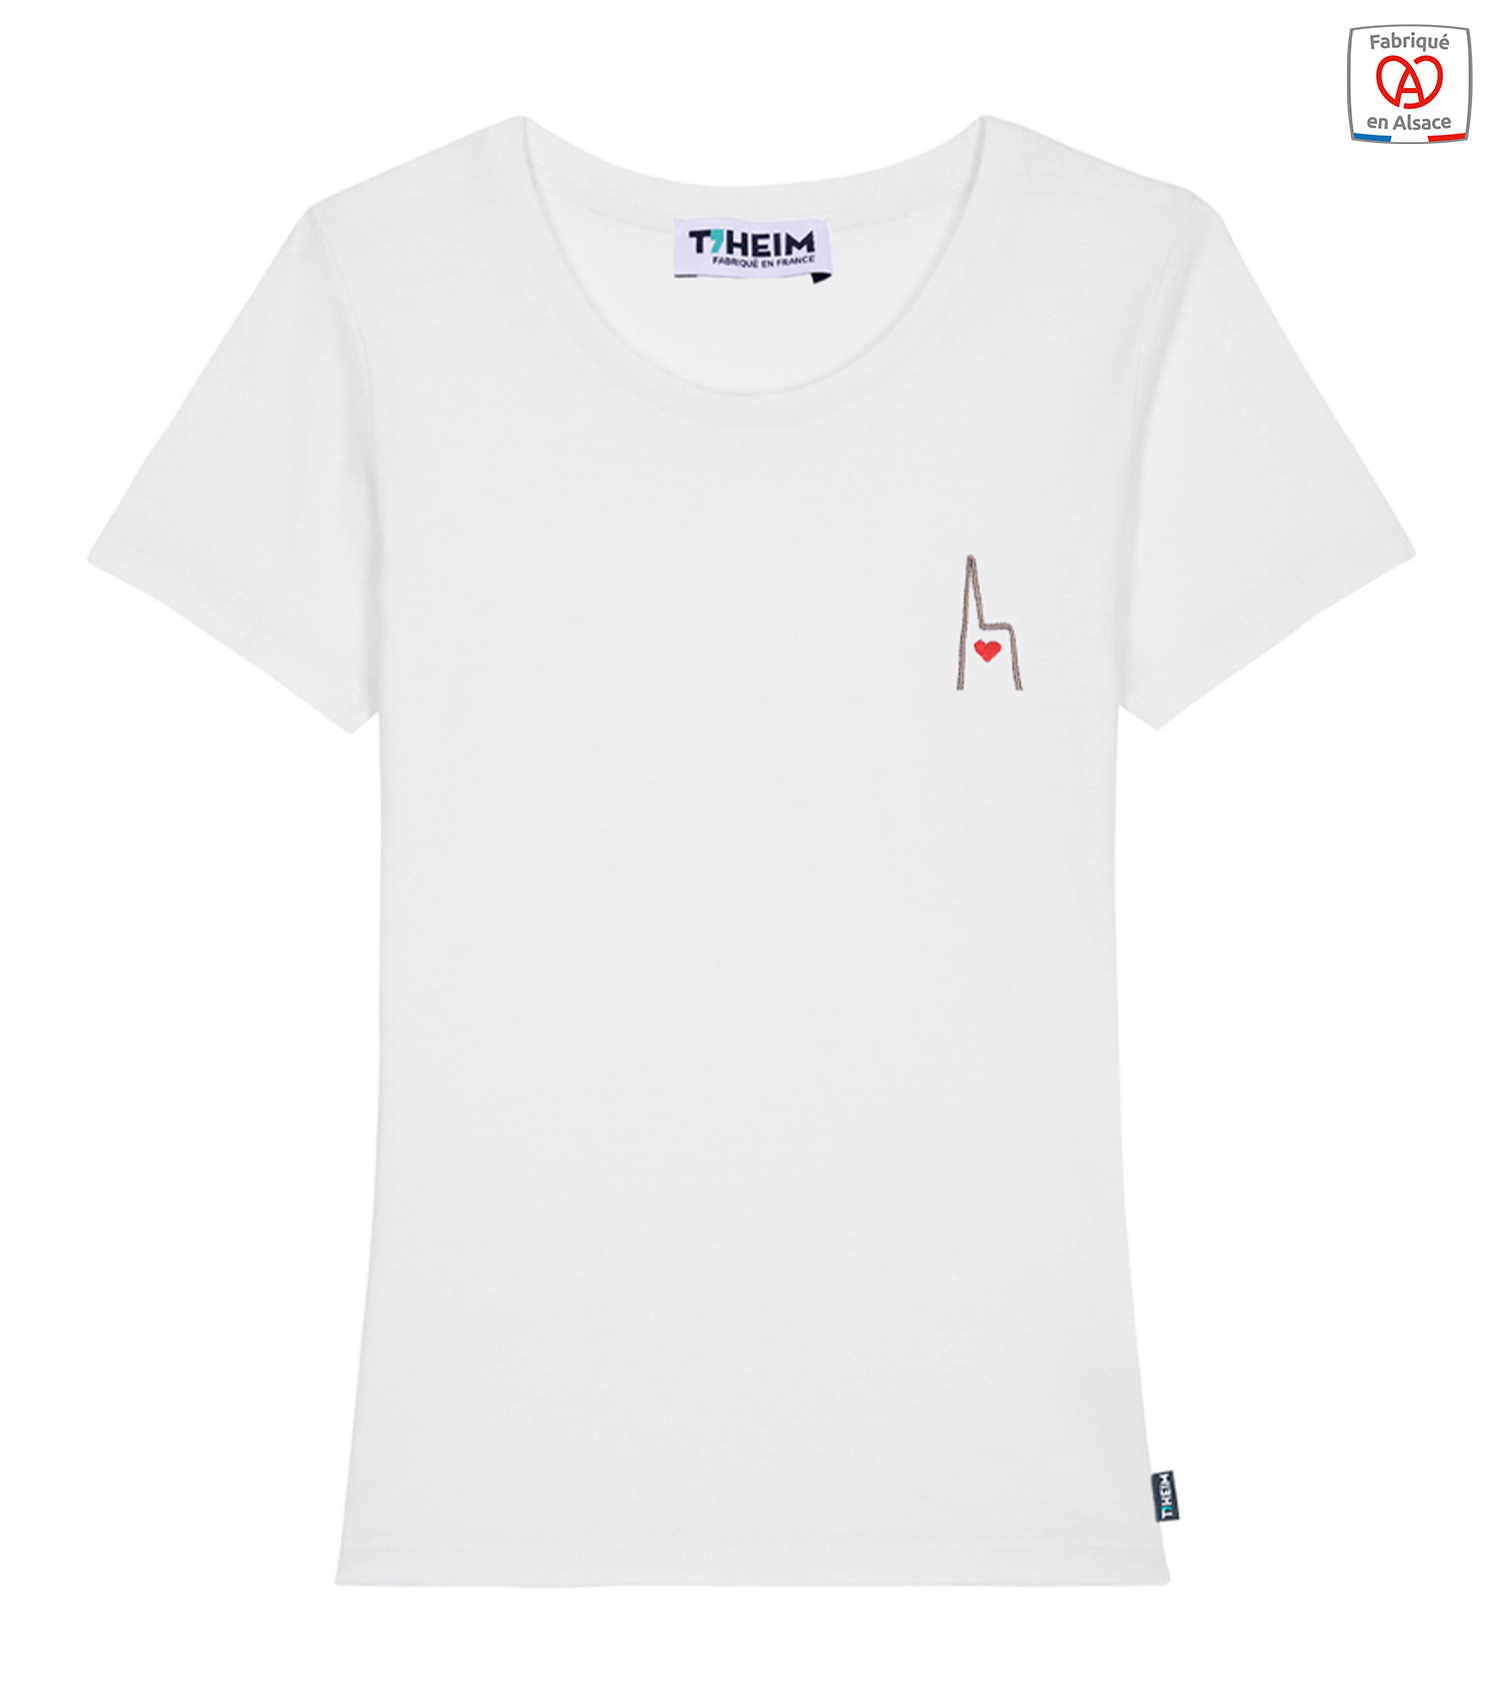 theim-t-shirt-femme-blanc-cathedrale-made-in-france-1500x1700px